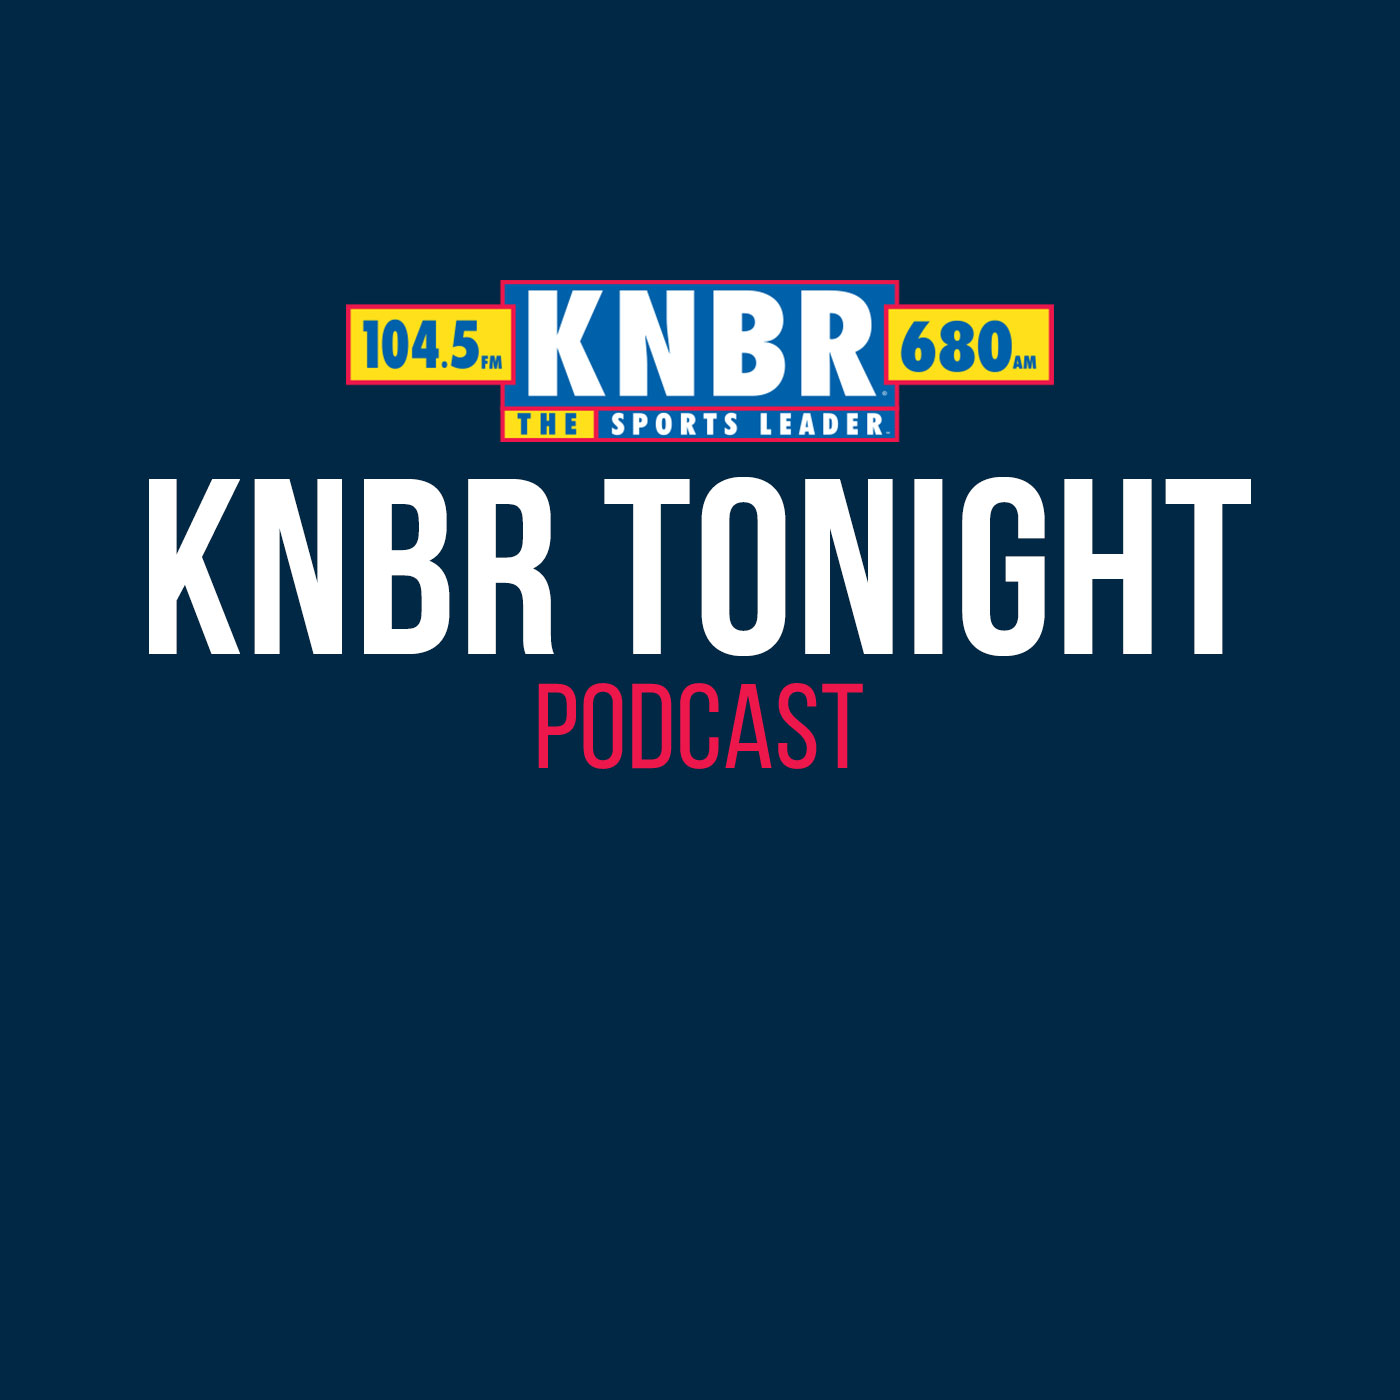 4-13 Dalton Johnson of NBC Sports Bay Area, joins KNBR Tonight to provide an update on the Warriors and Steph Curry as well as what he saw at the Warriors recent practice ahead of their playoff series against Denver